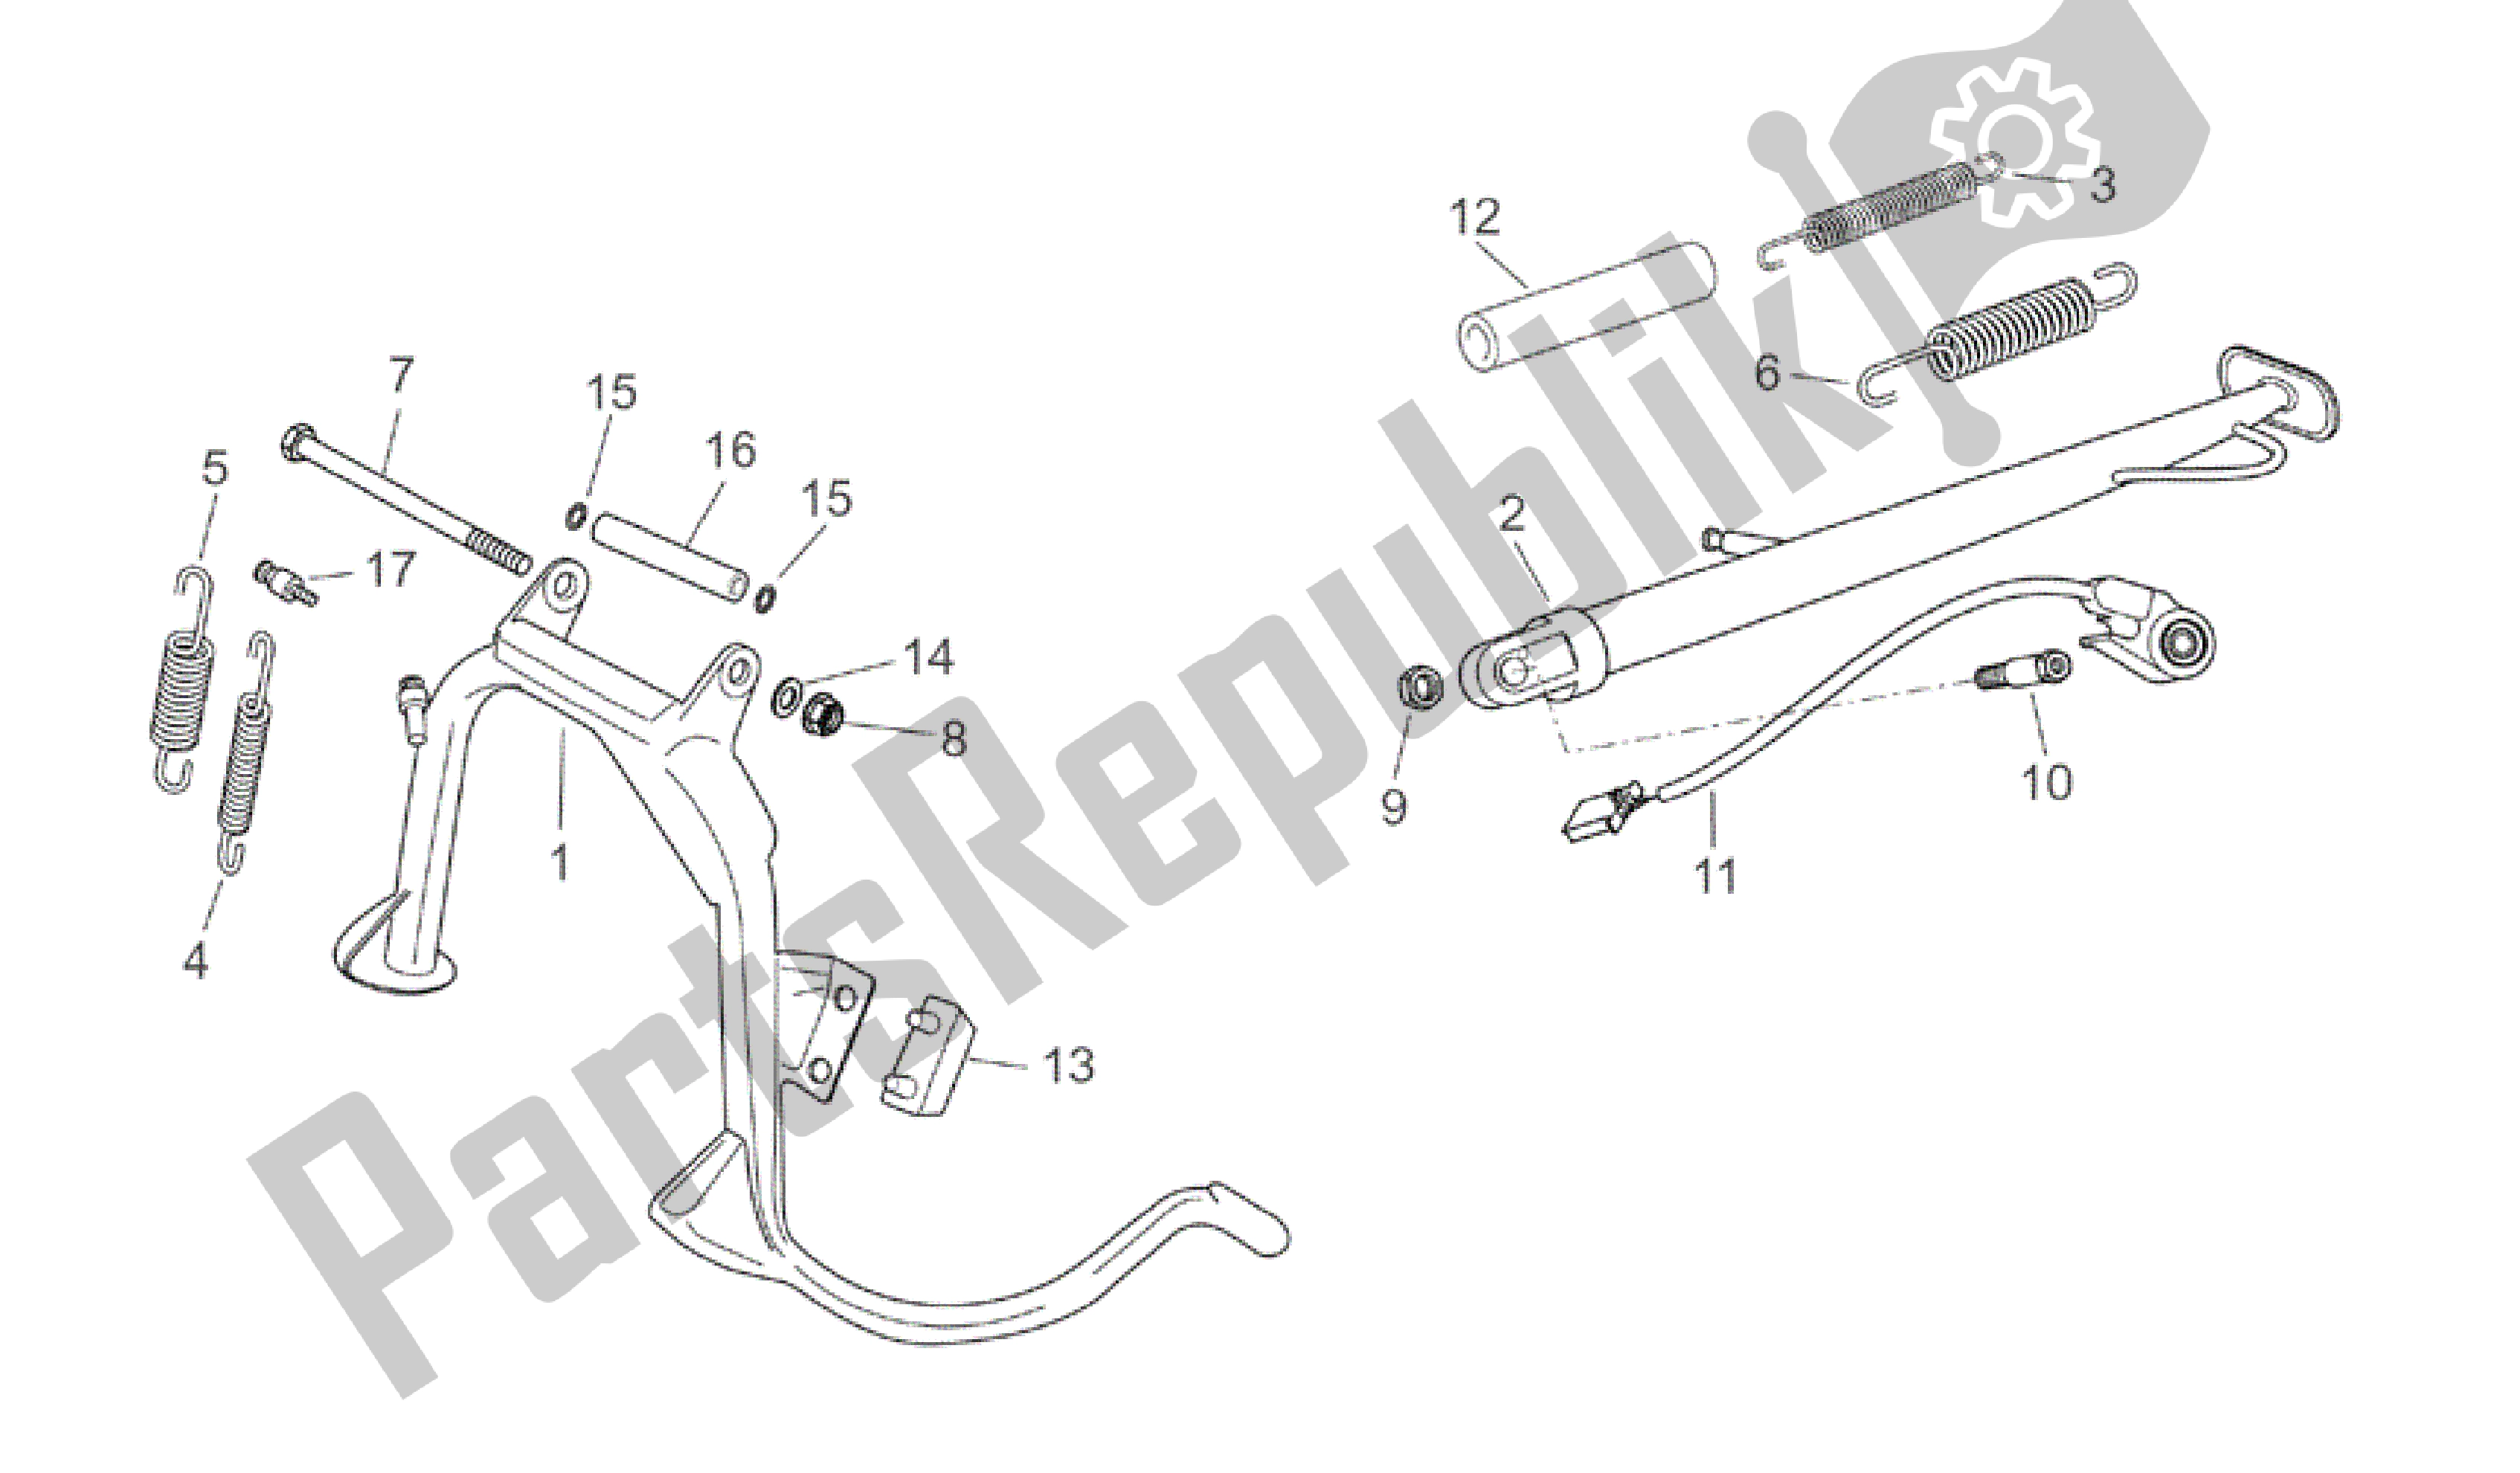 All parts for the Central Stand of the Aprilia Atlantic 200 2003 - 2006